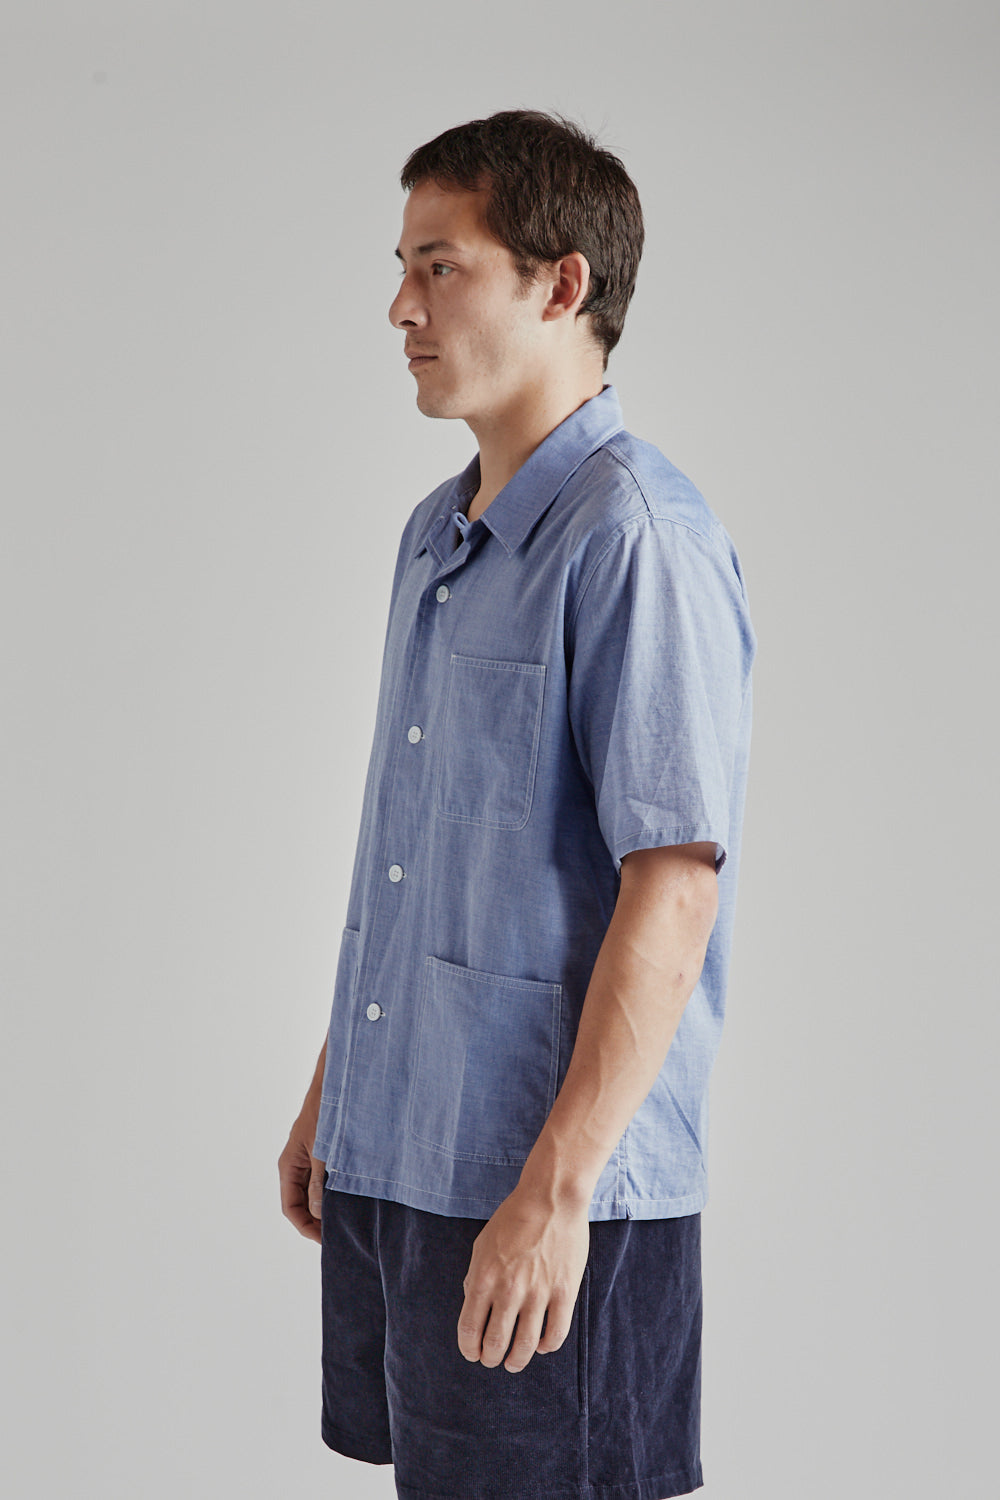 Brother Brother 3 Pocket Shirt in Navy Chambray